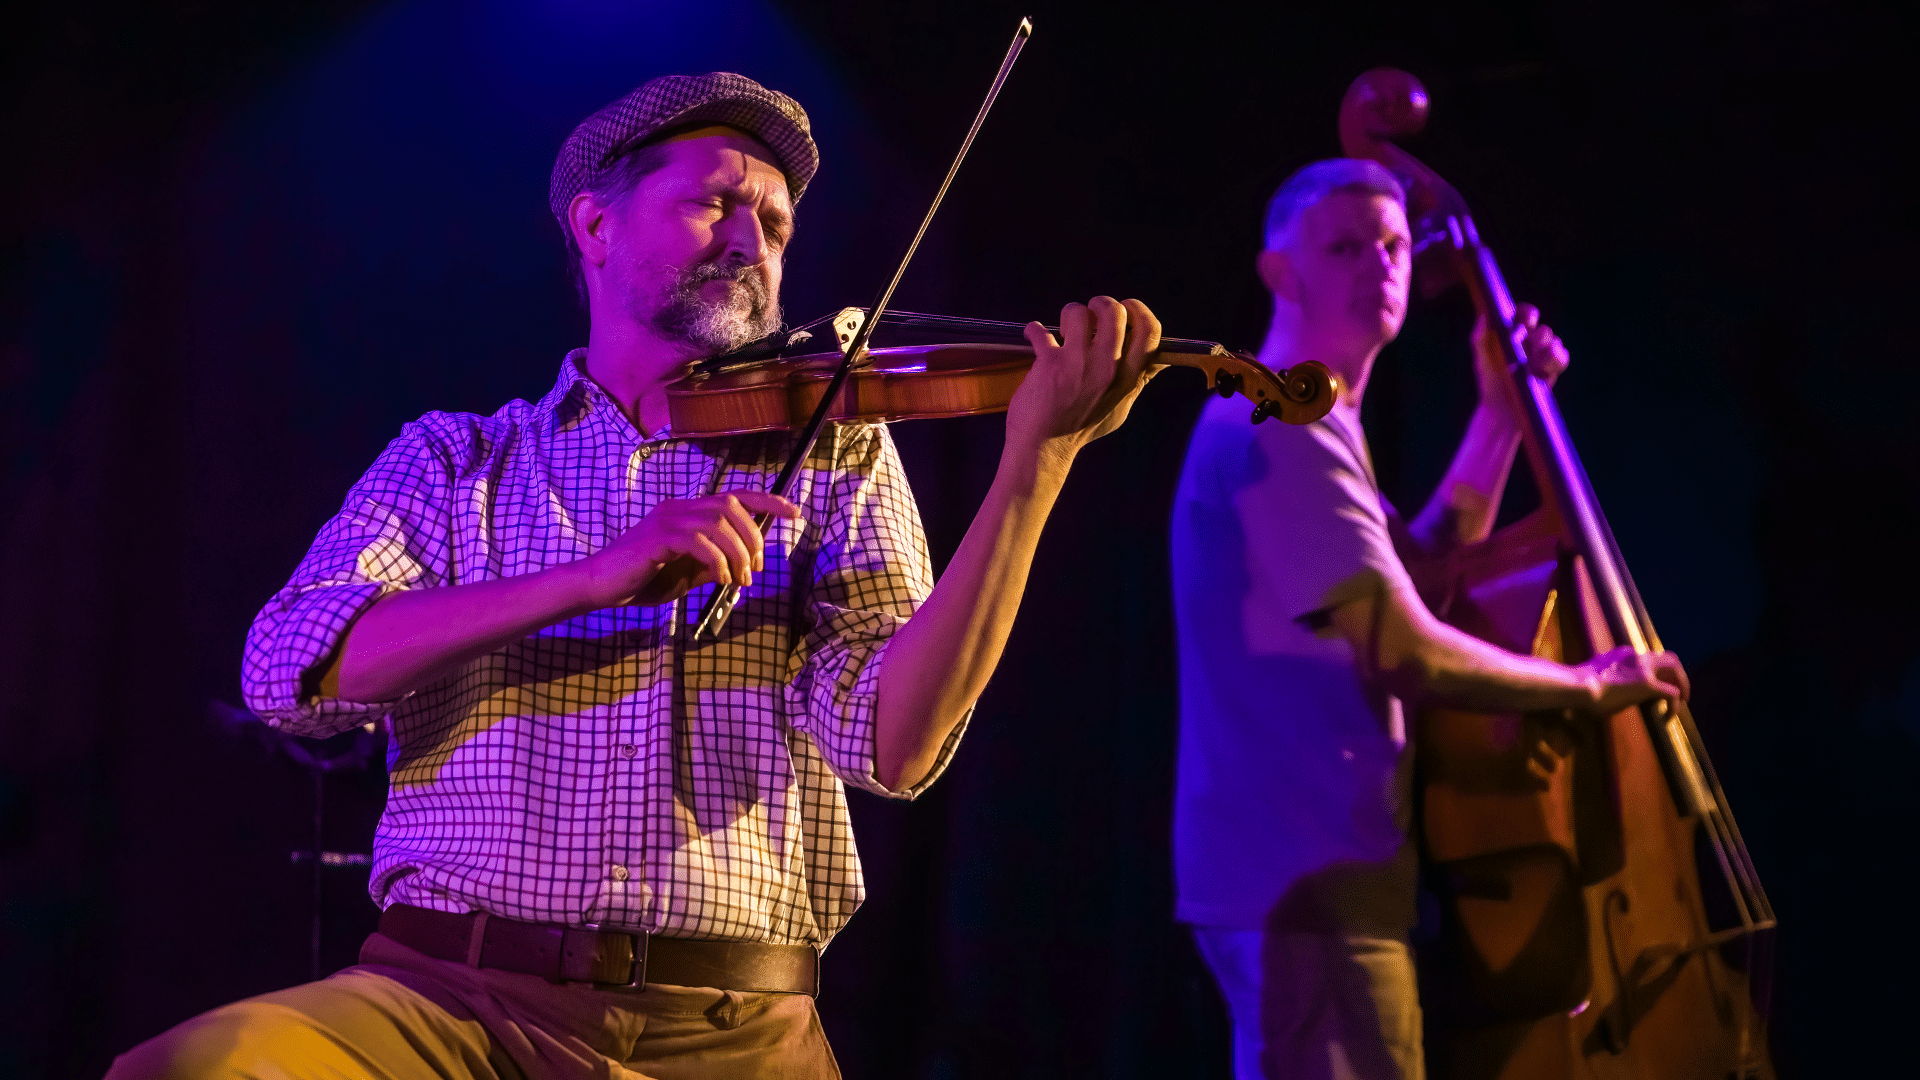 One Man and His Cow production photo - On the left, in the foreground: Ian Harris playing the violin. His eyes are closed in concentration and he wears a farmer-style flat cap and a white square-patterned shirt. On the right, in the background: Stu McLoughlin plays the double-bass. Background black with blue light.